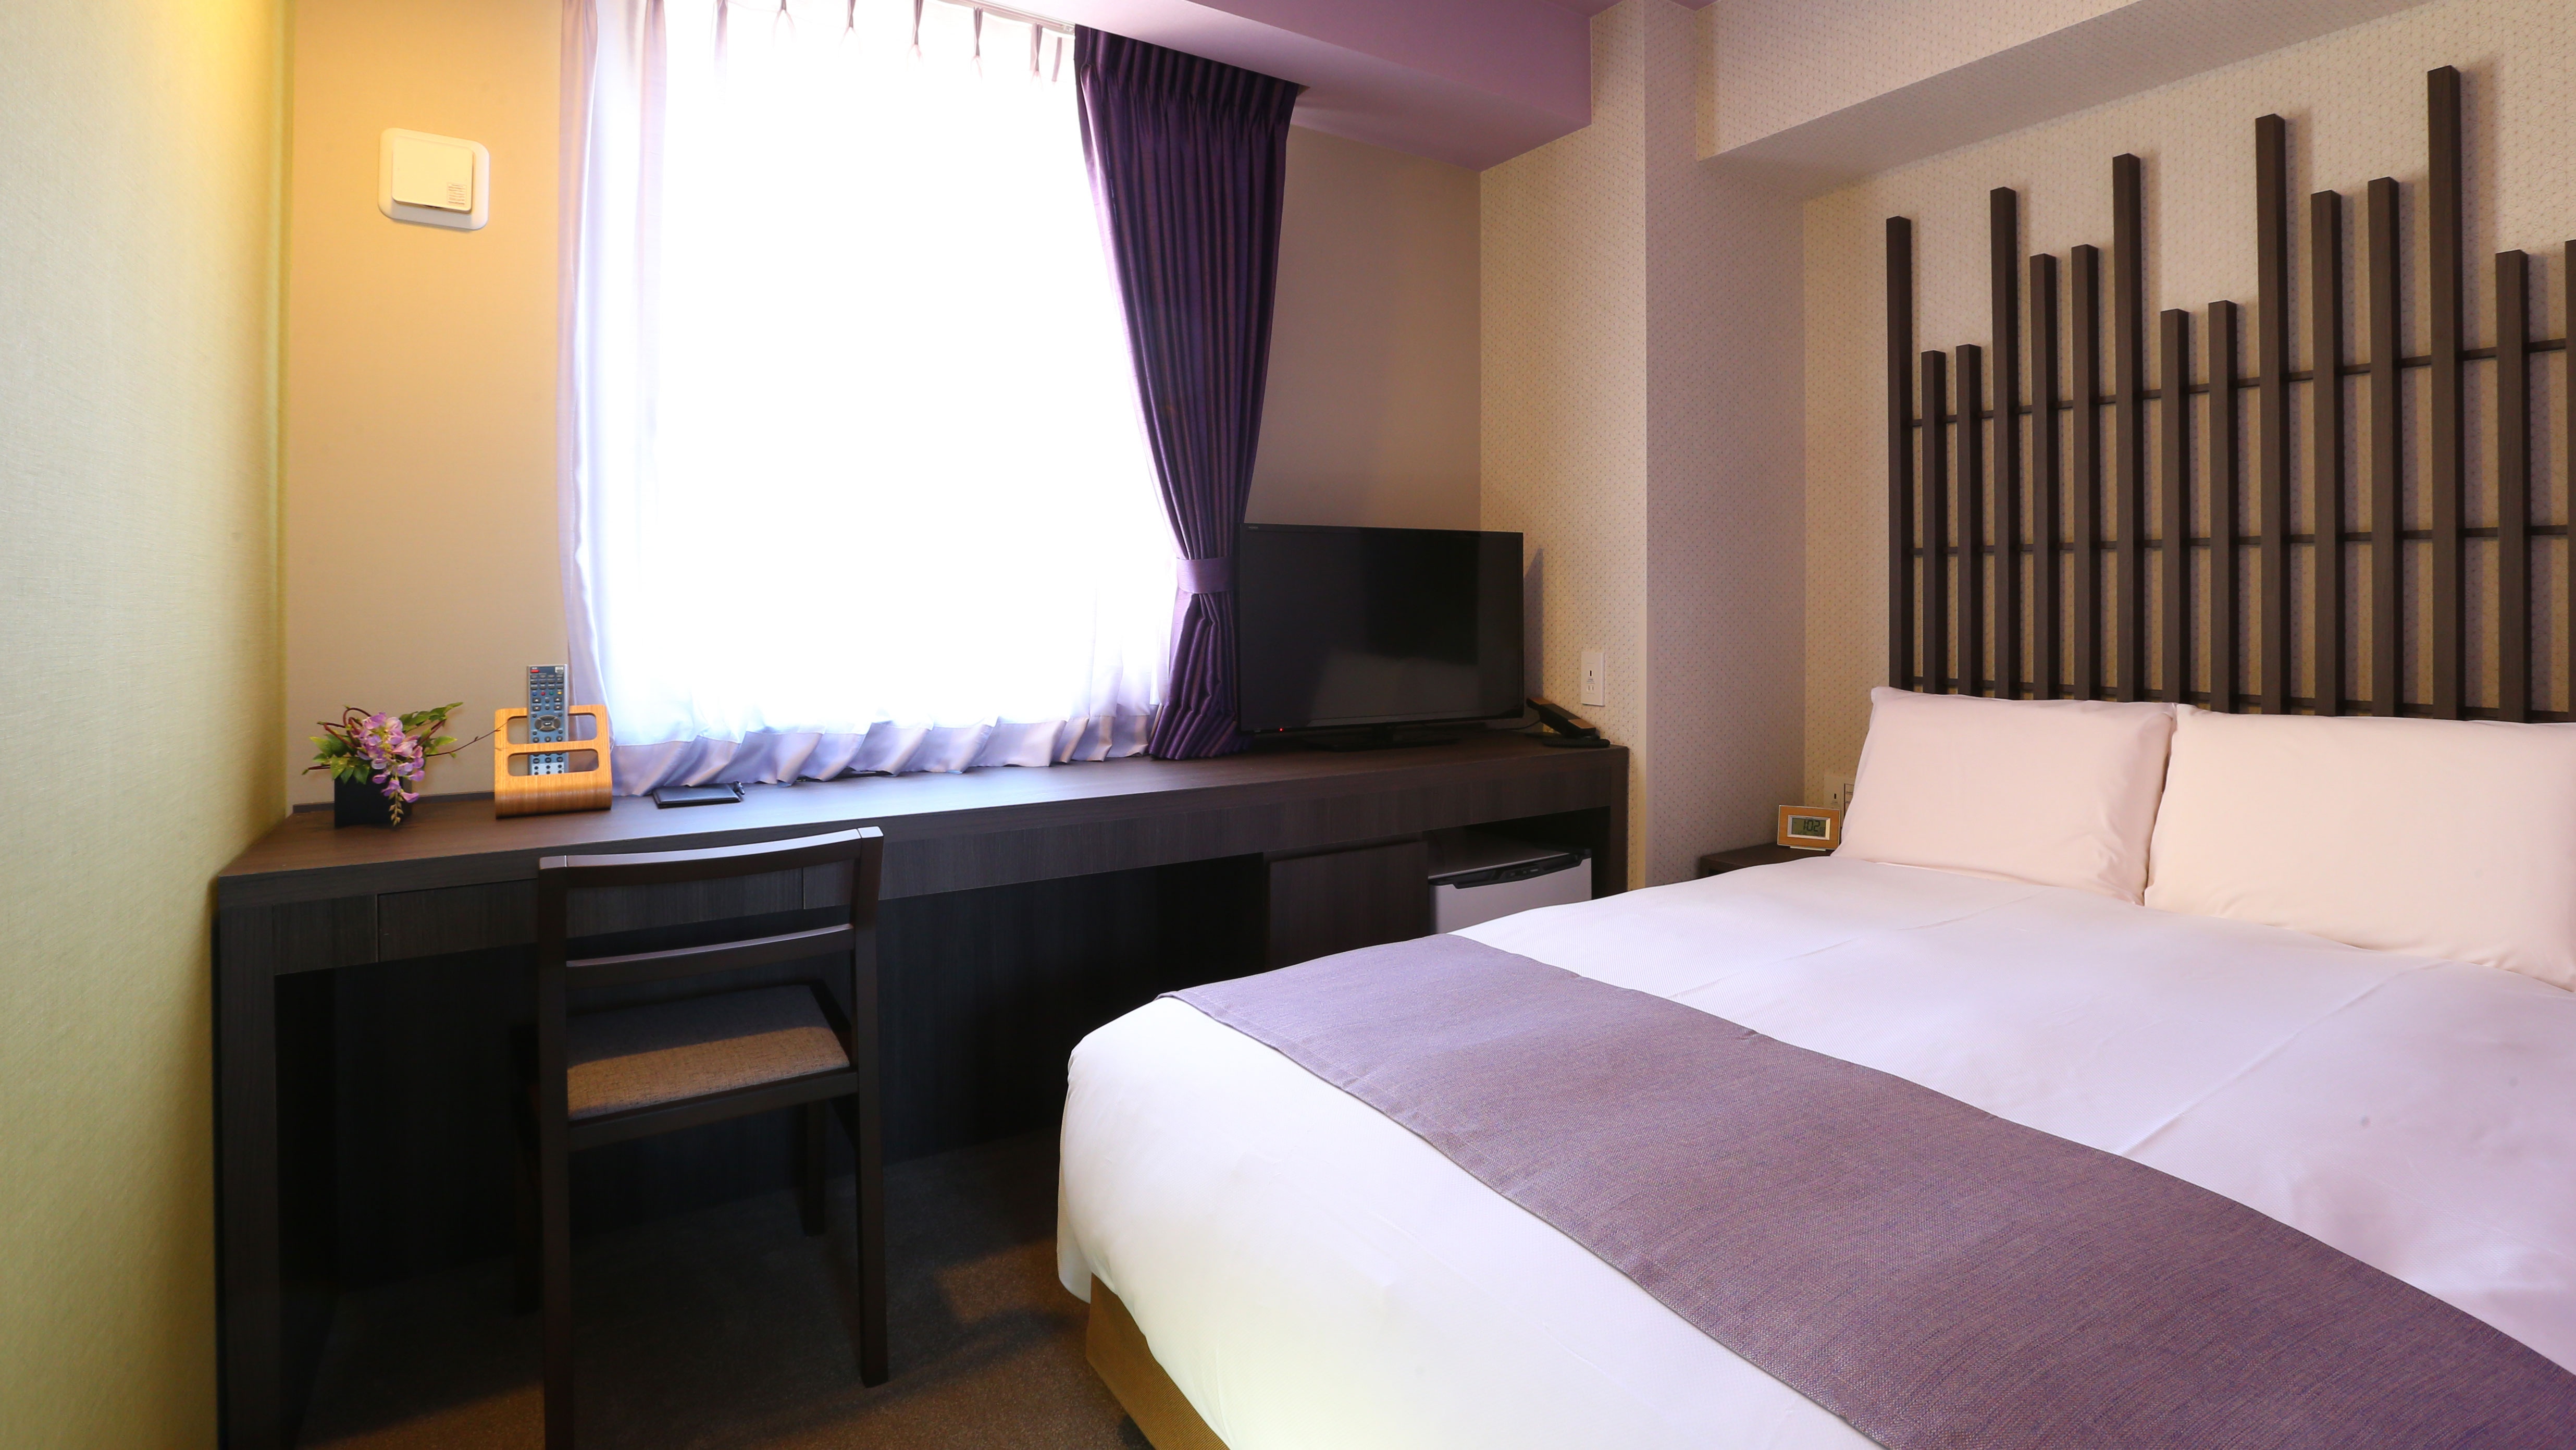 An example of the 13th floor wisteria (DX single/double) guest room